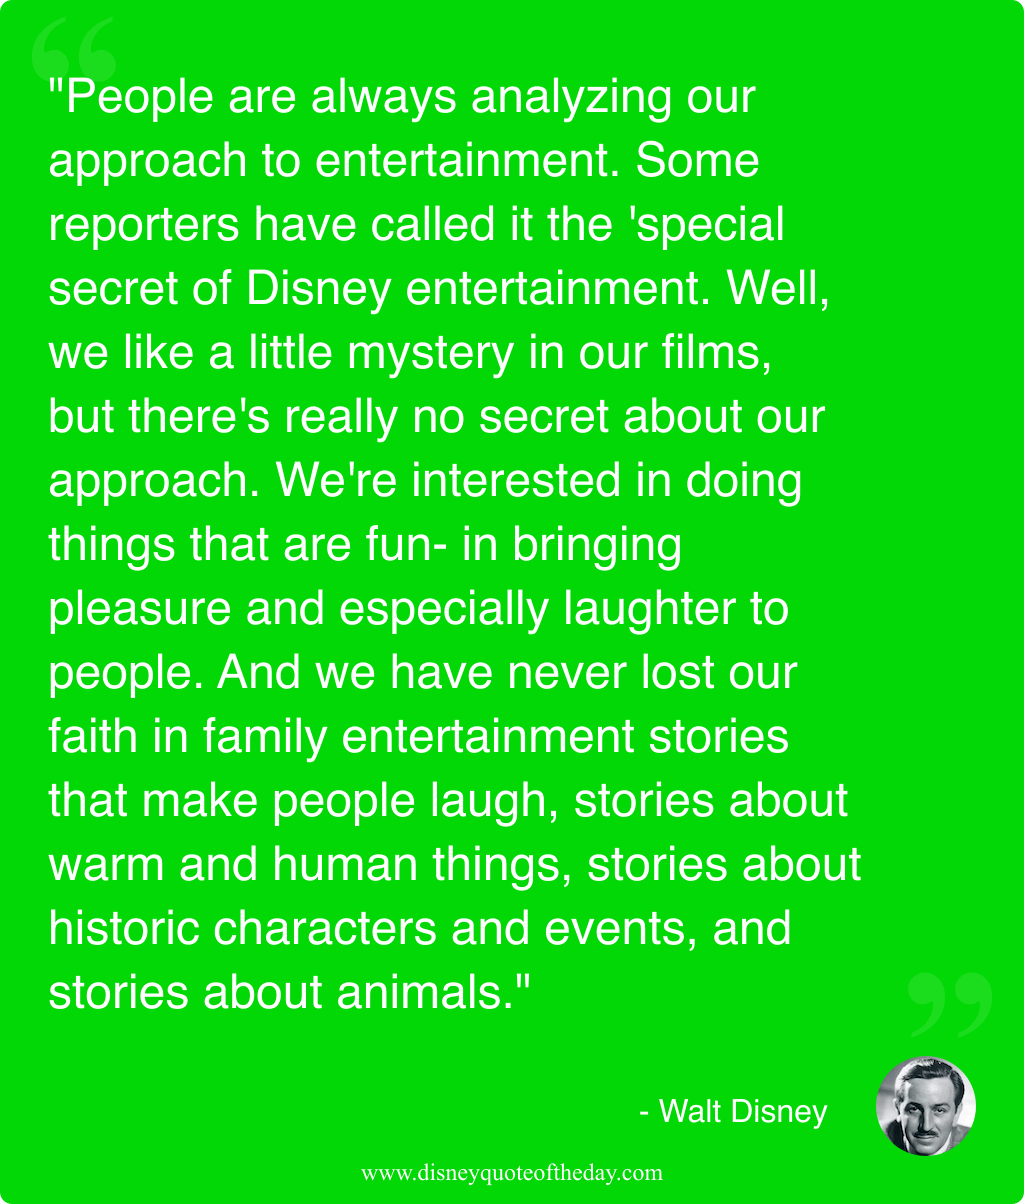 Quote by Walt Disney, "People are always analyzing our..."